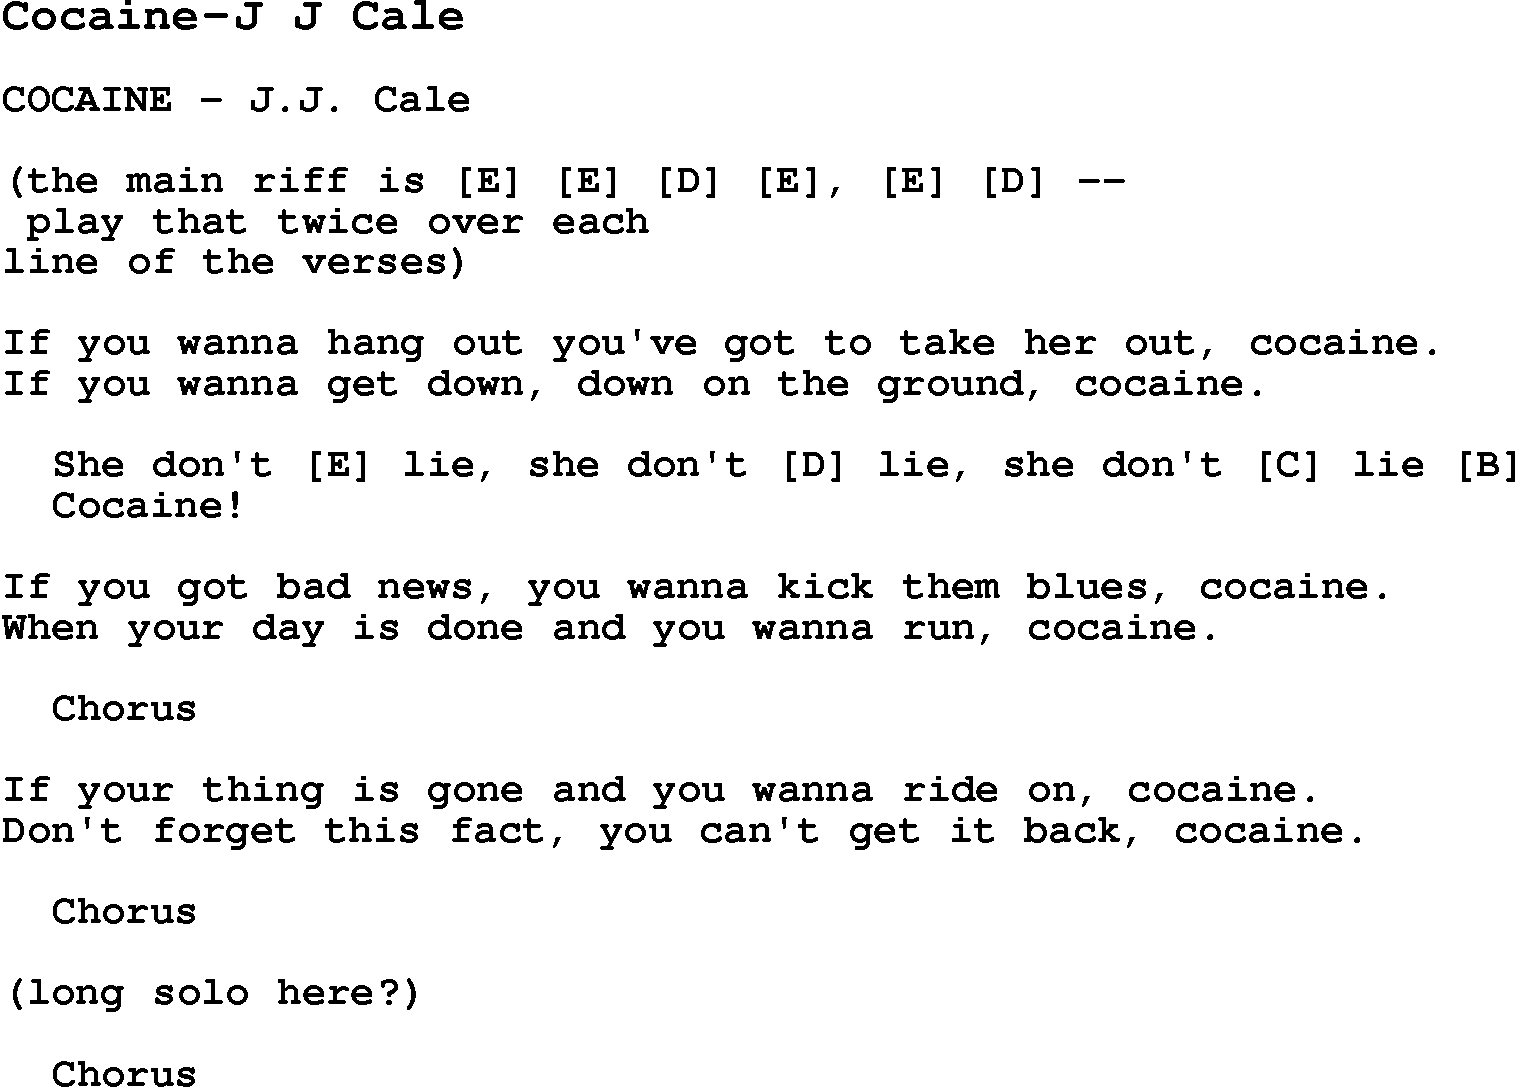 Blues Guitar Song, lyrics, chords, tablature, playing hints for Cocaine-J J Cale